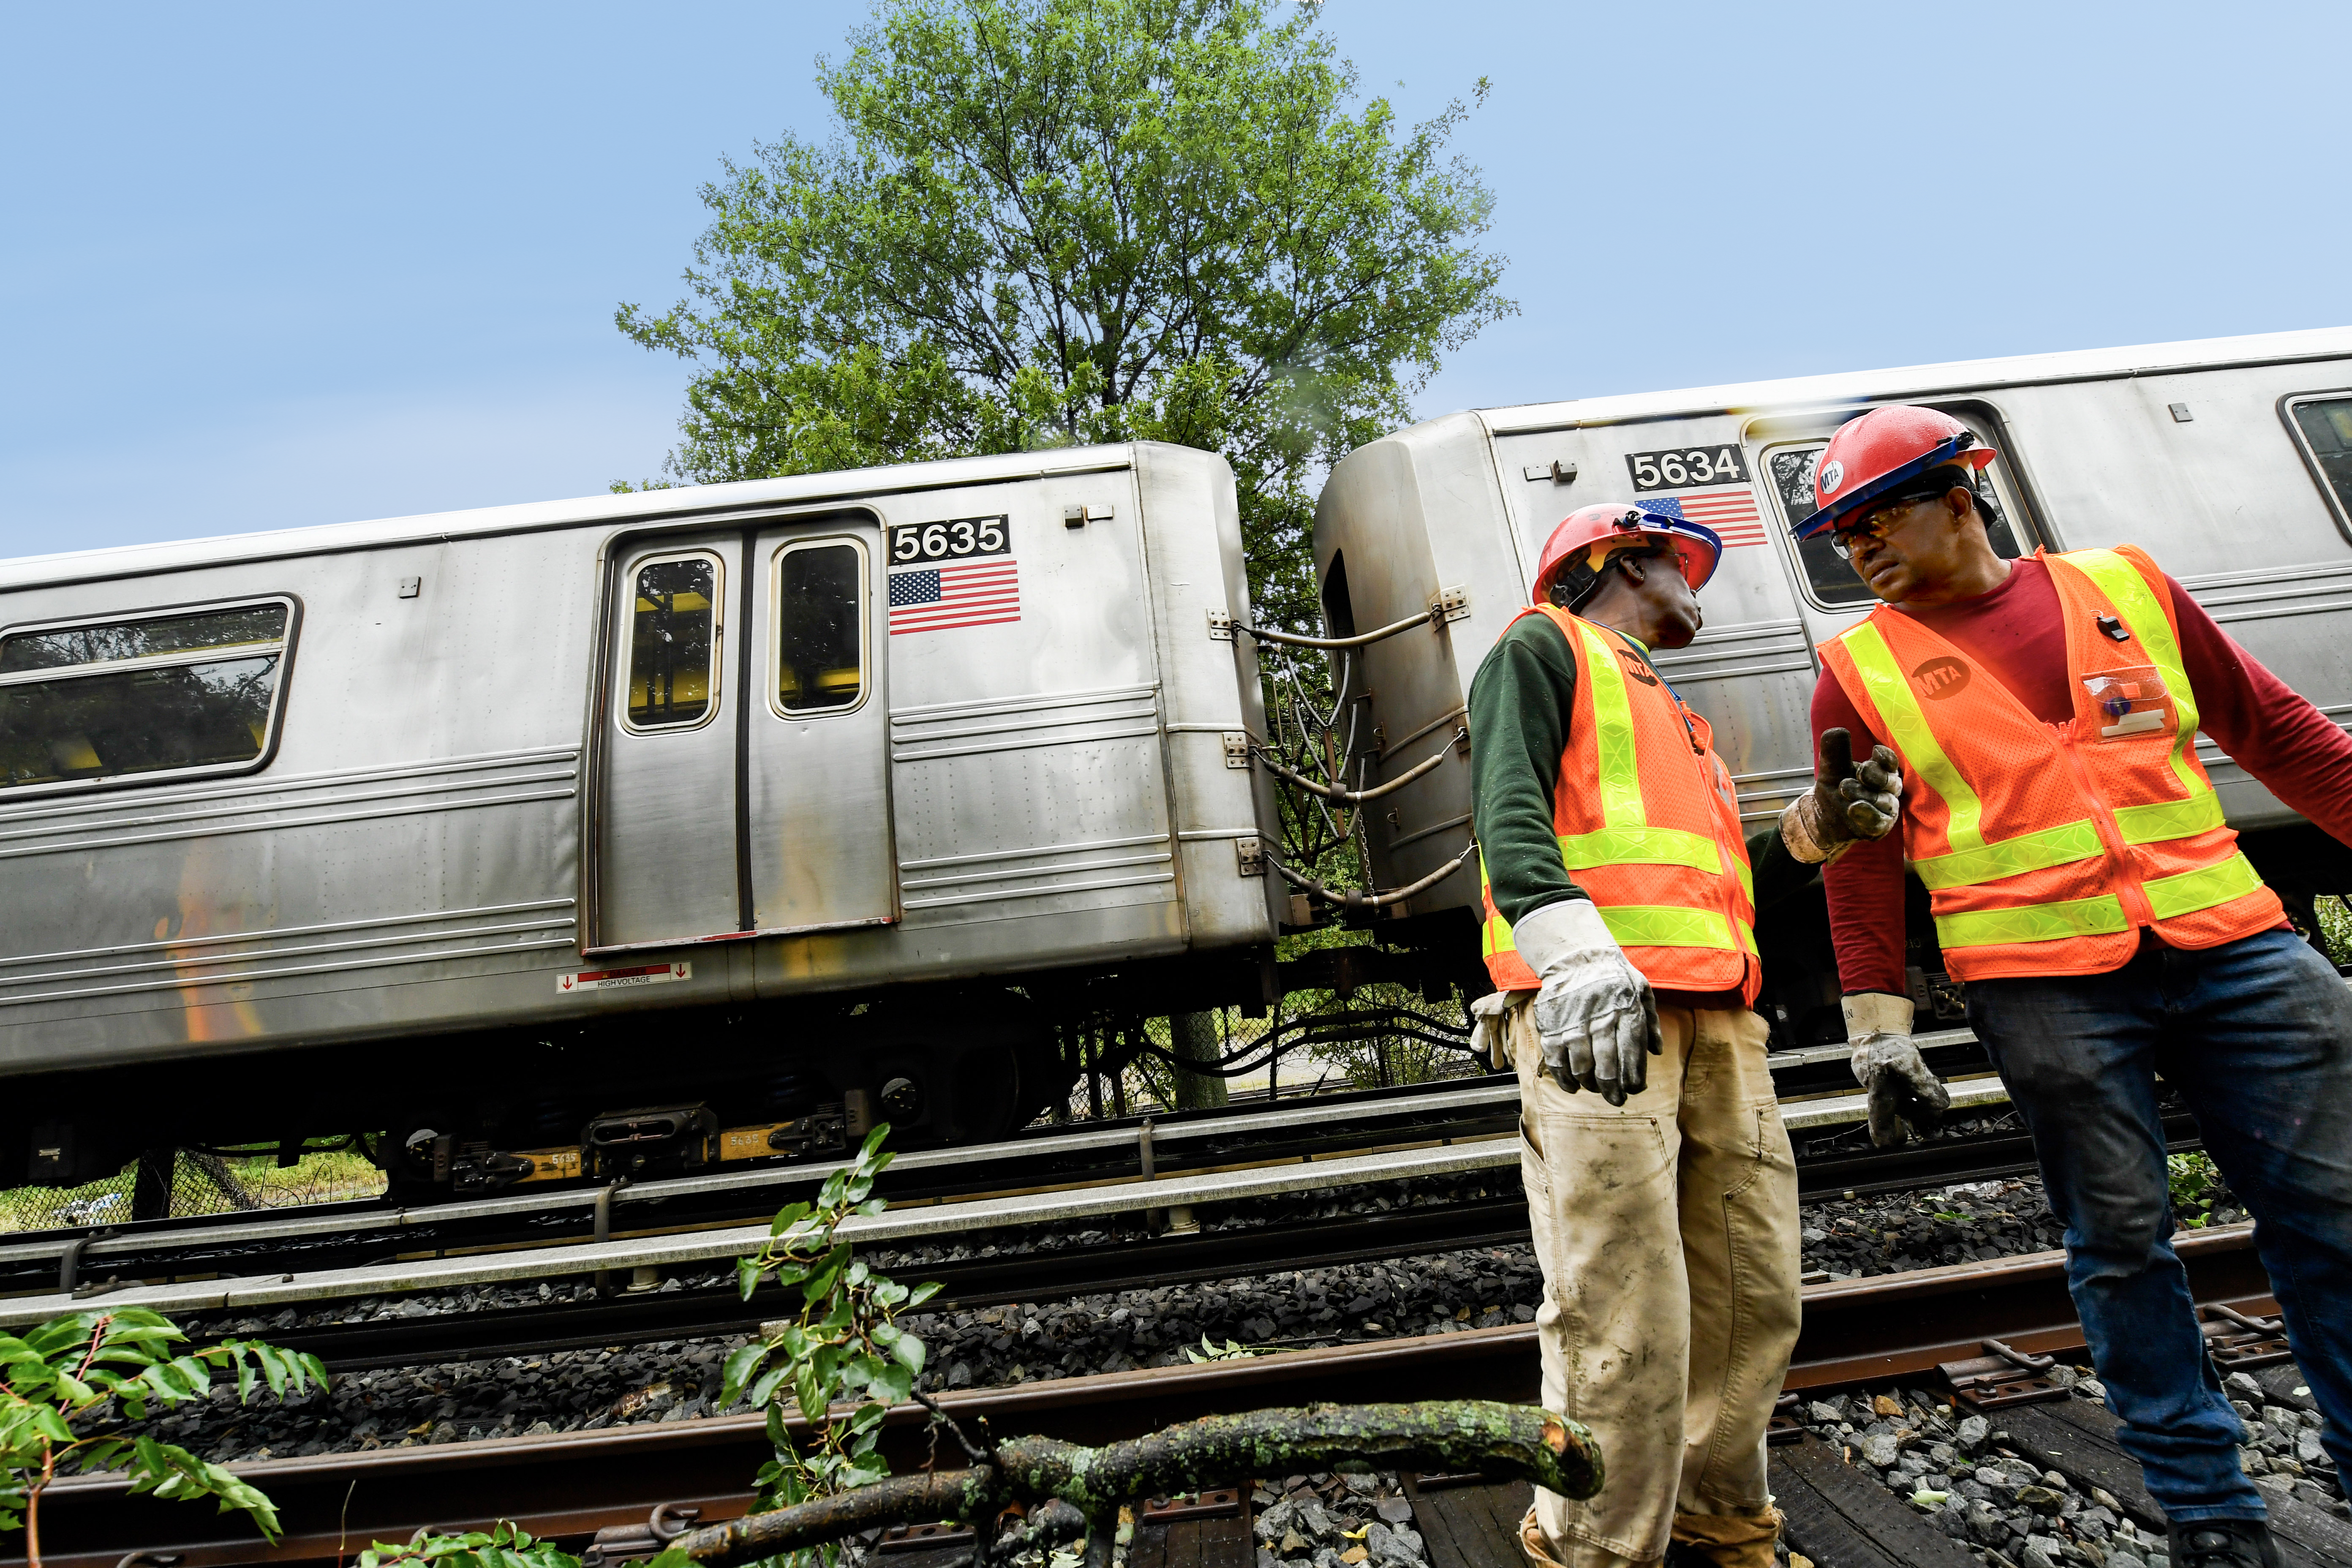 Subway workers alongside a train on elevated tracks obstructed by branches after a storm